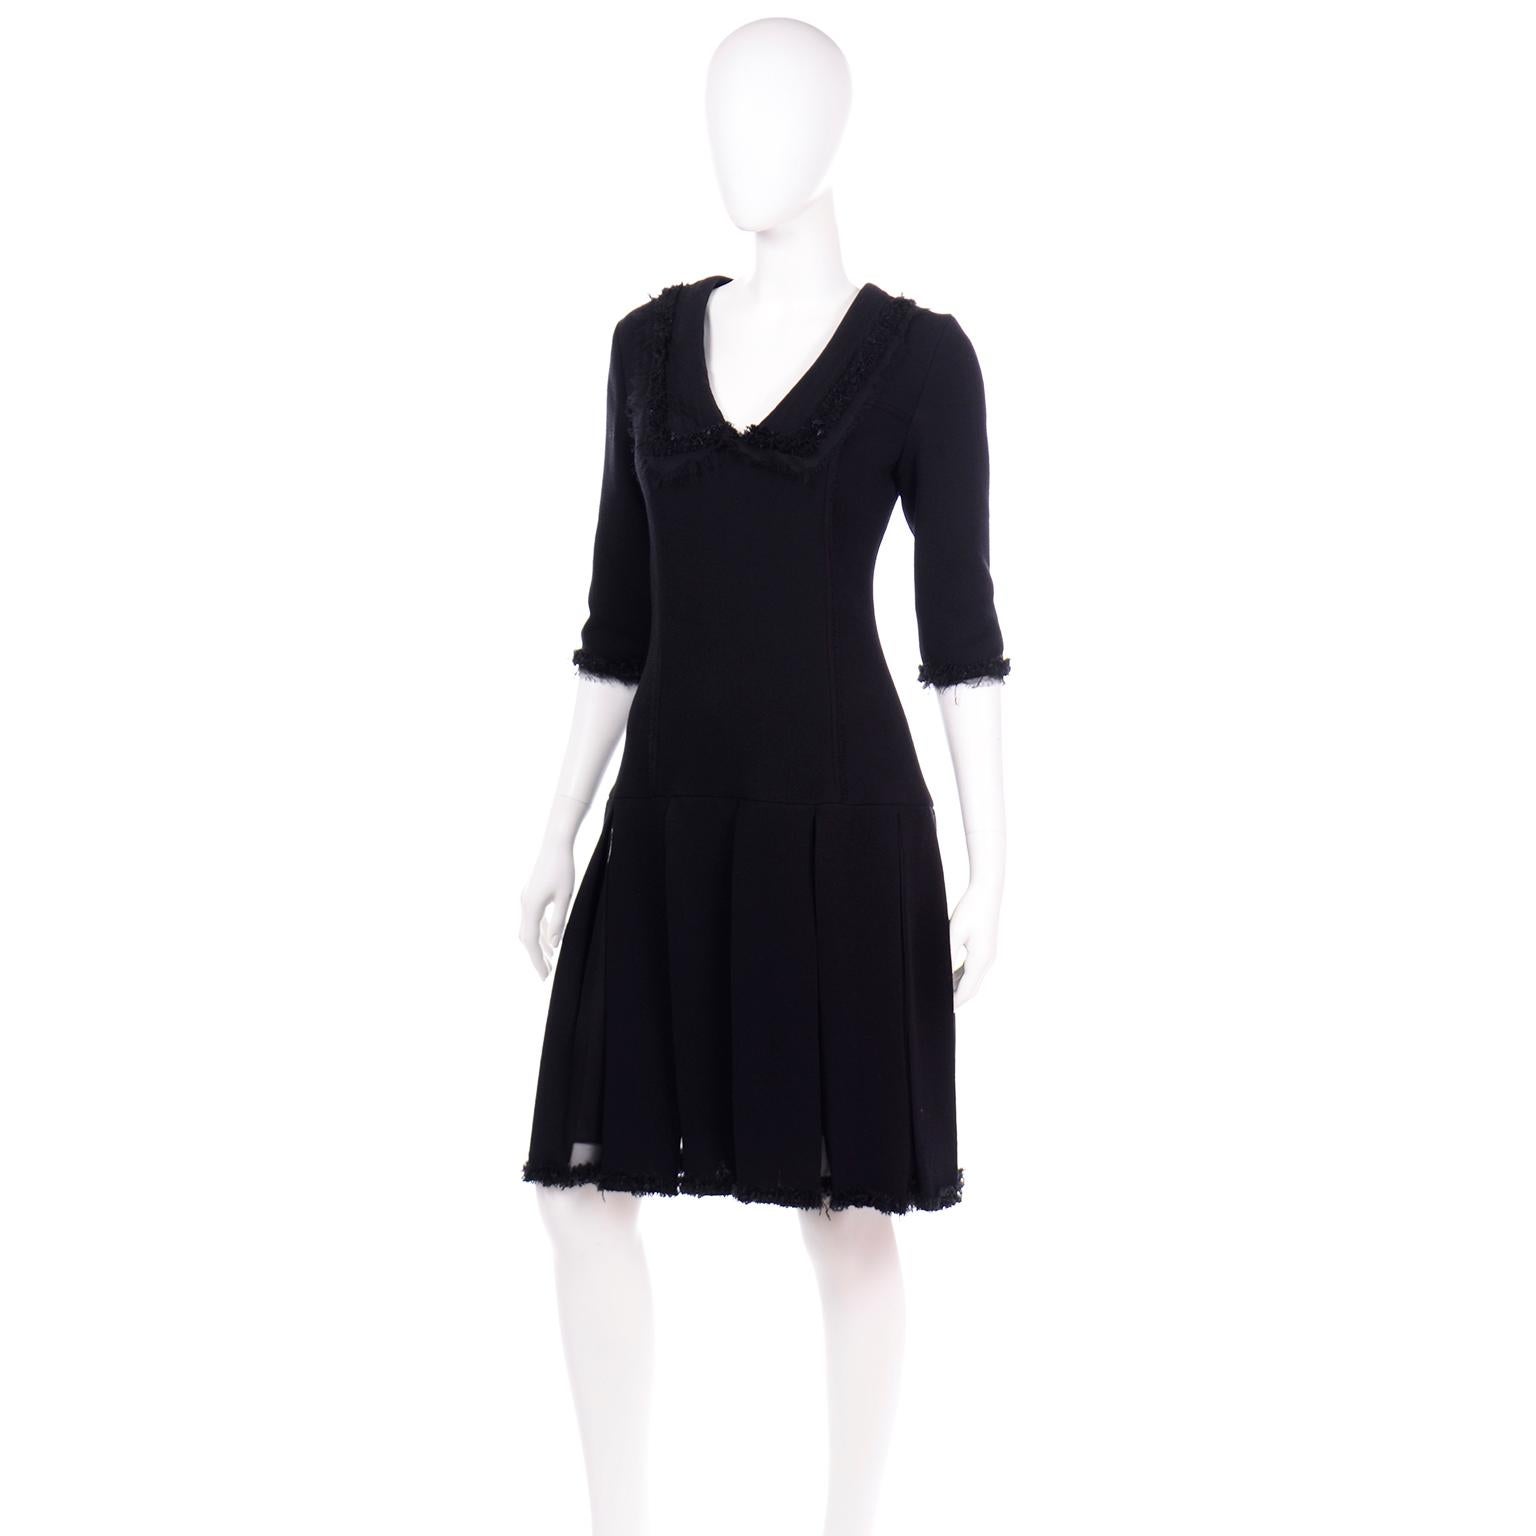 Oscar de la Renta Fall 2010 Black Dress With Raw Edges & Sheer Panel Pleating In Excellent Condition For Sale In Portland, OR